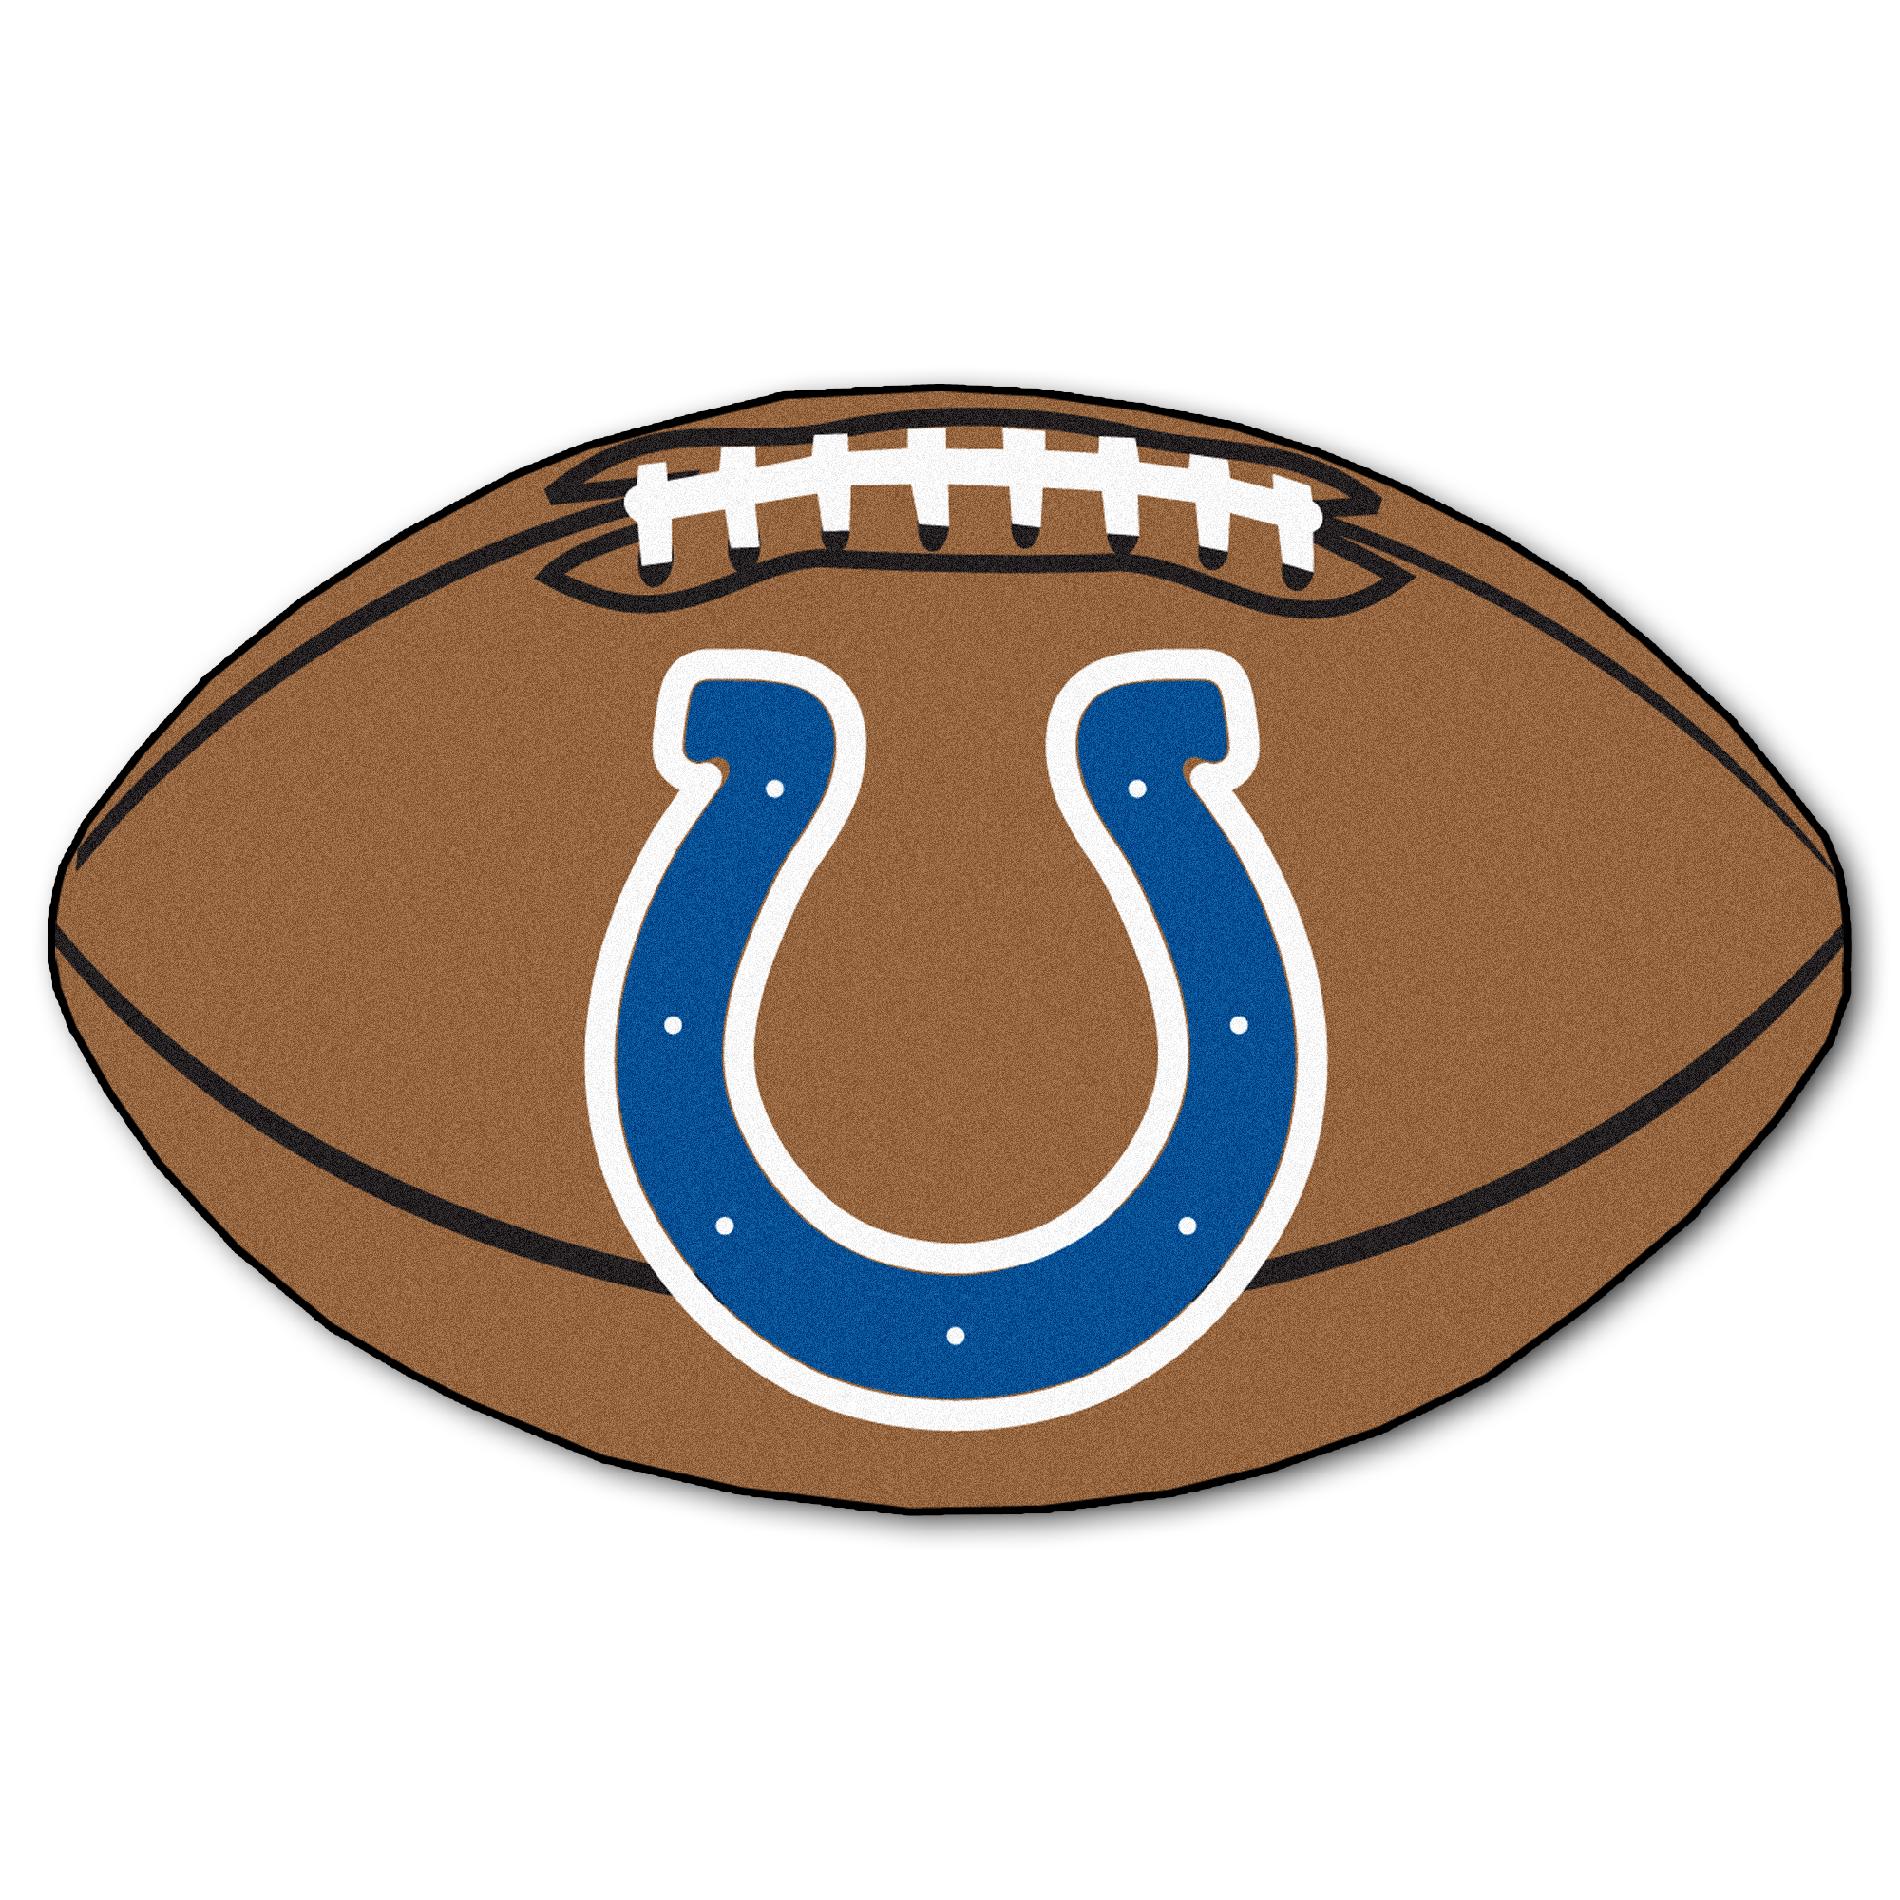 NFL - Indianapolis Colts Football Rug 22" x 33"